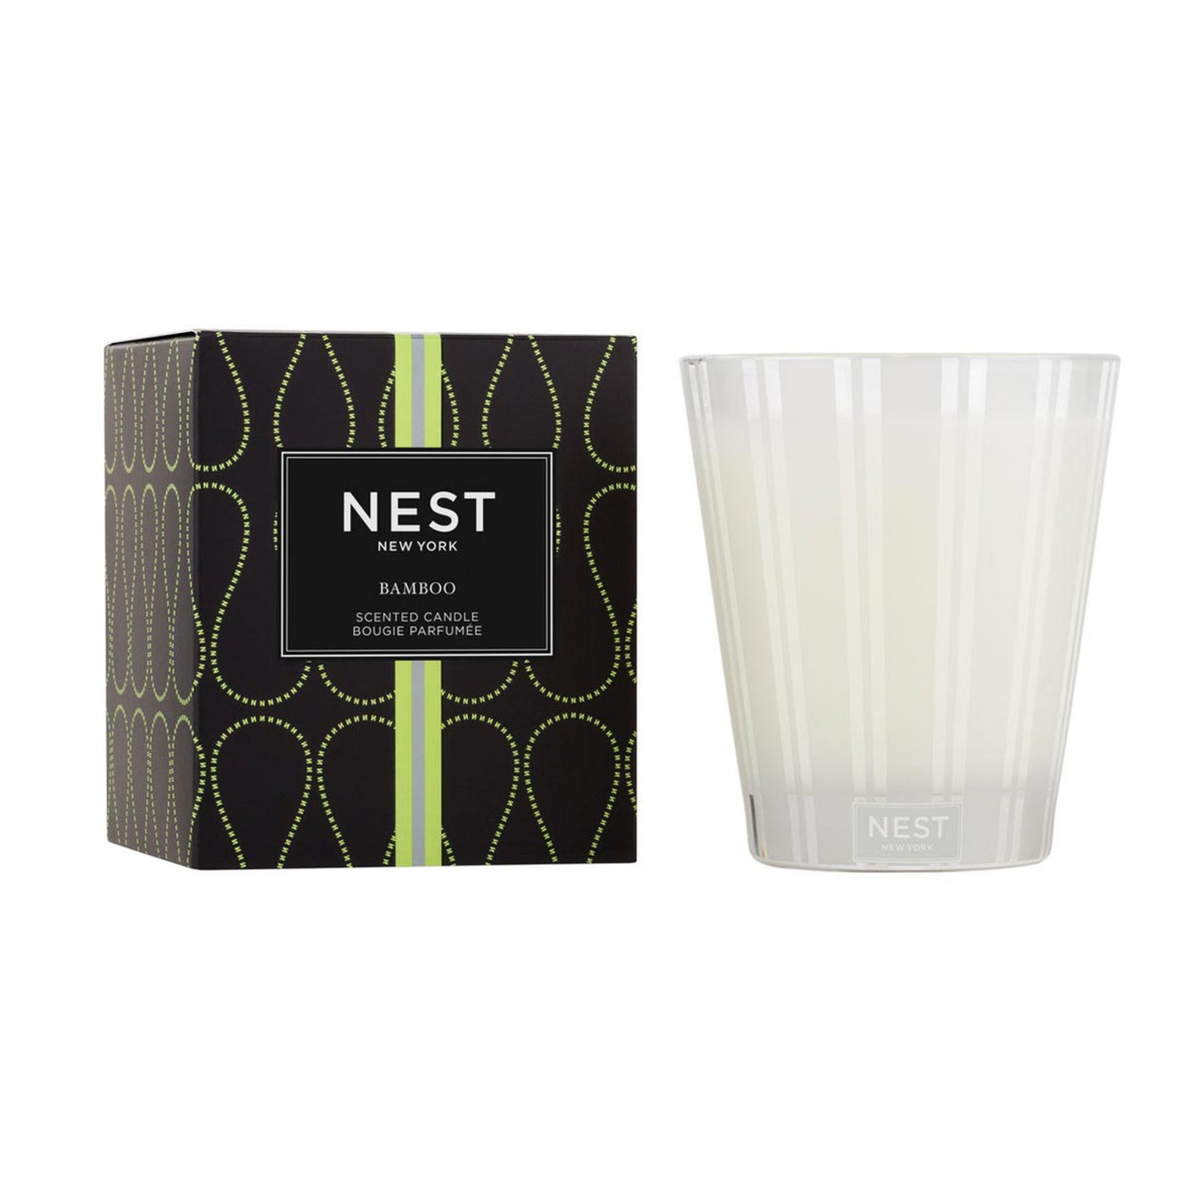 Product Image of Nest New York’s Bamboo Classic Candle with Box